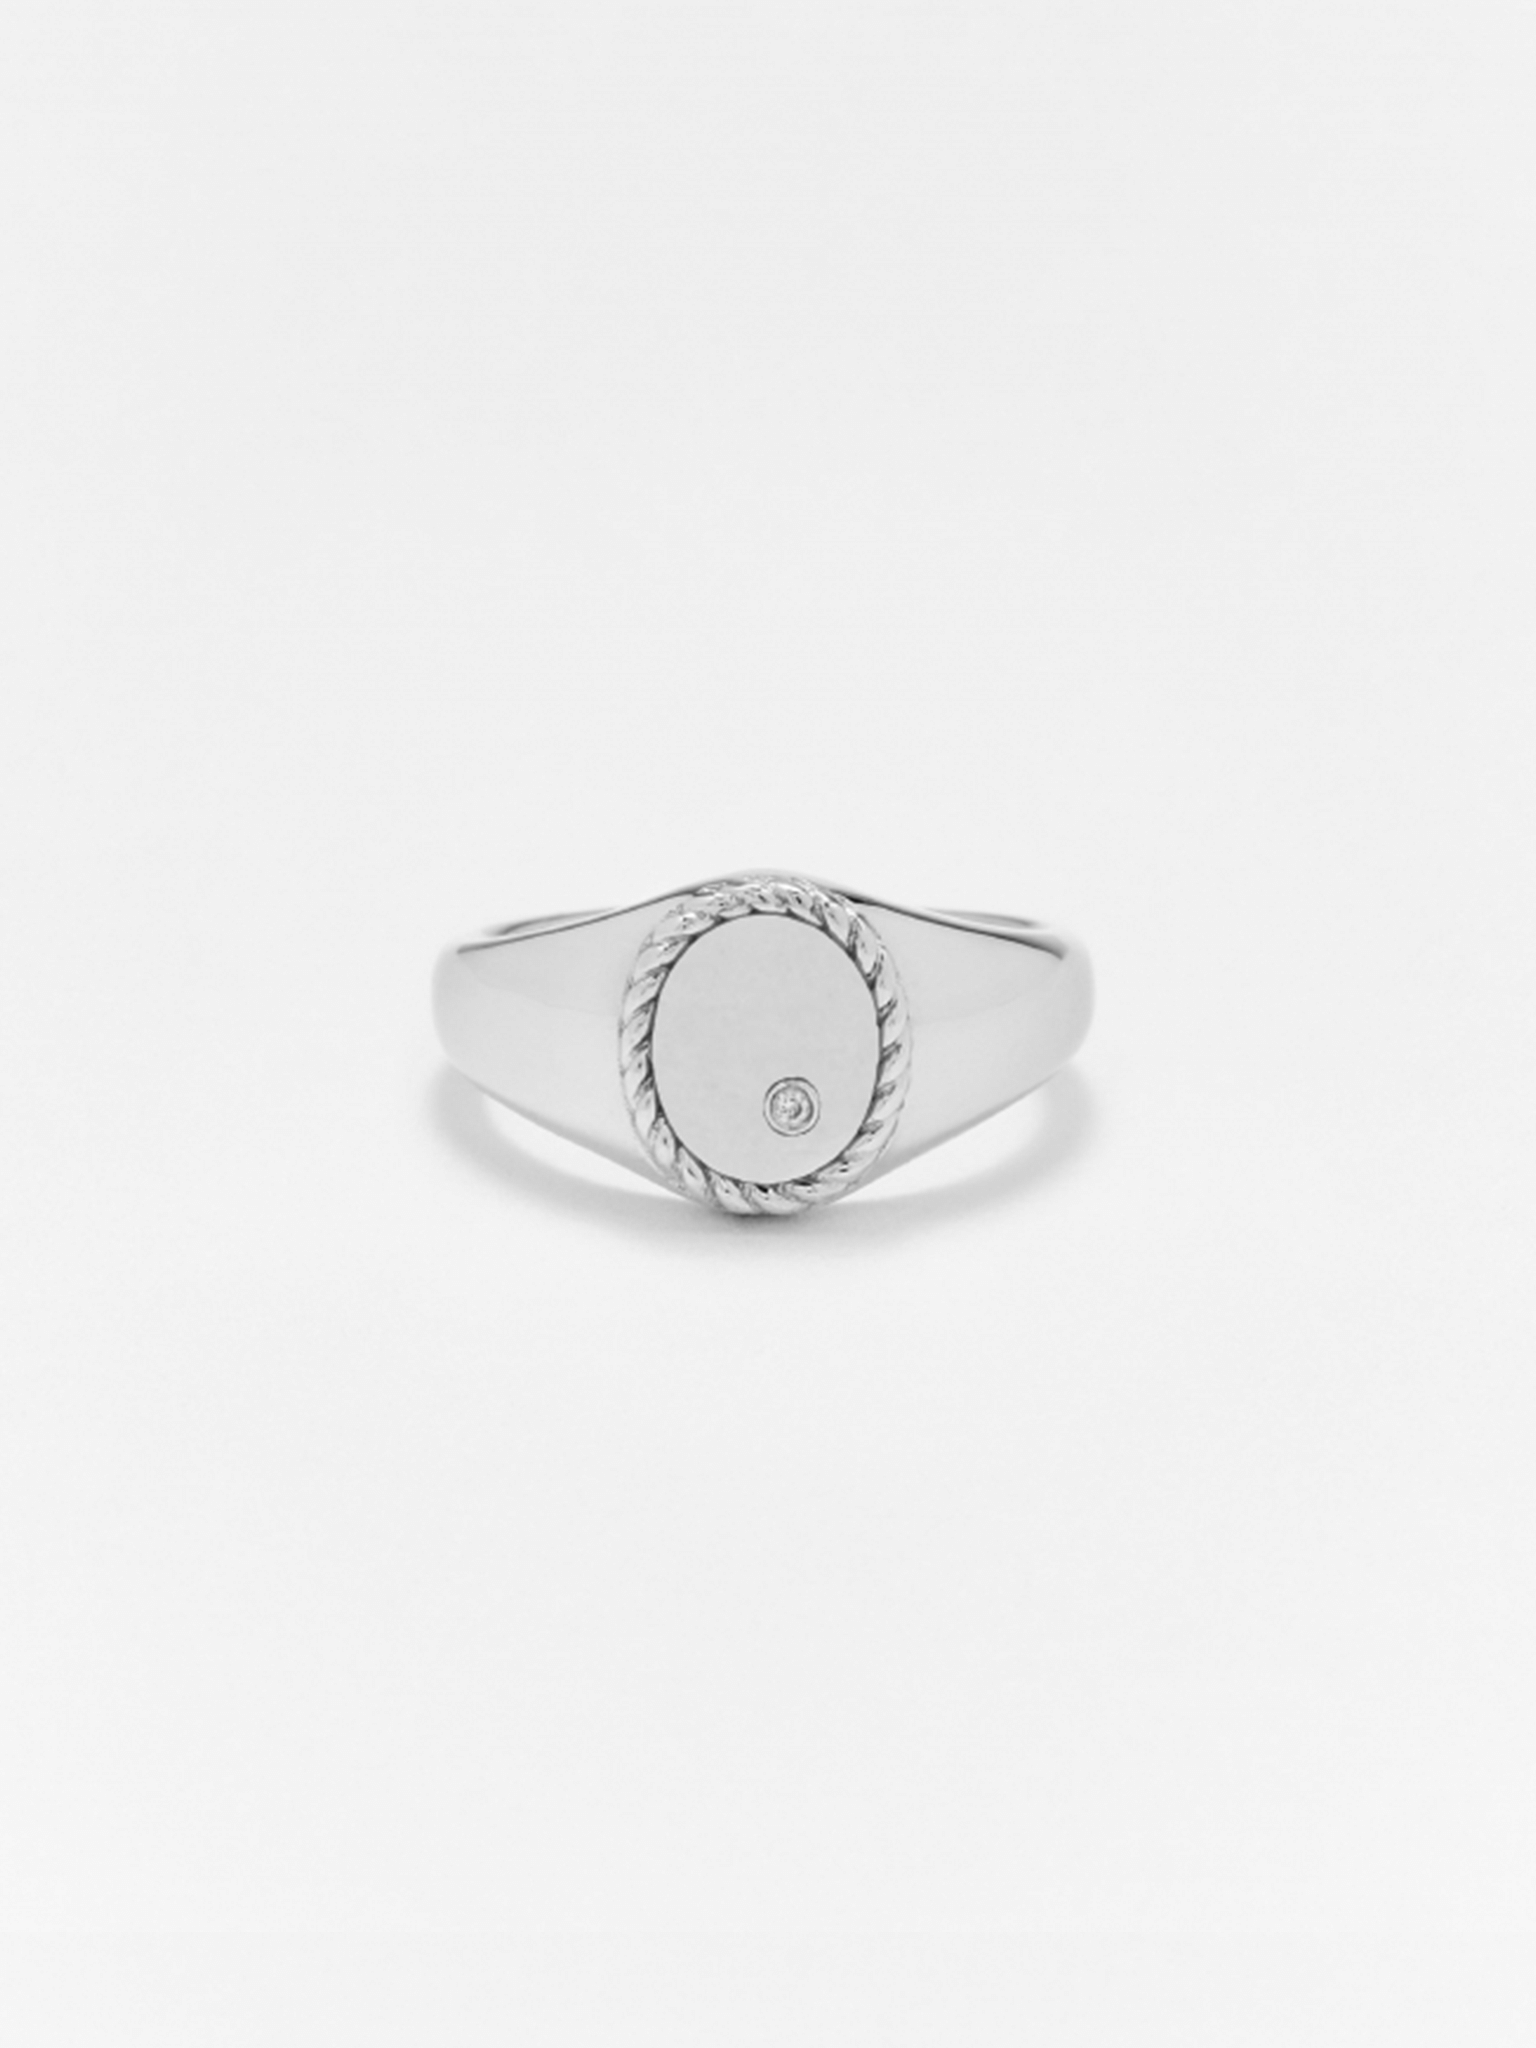 Mini diamond and white gold oval signet ring